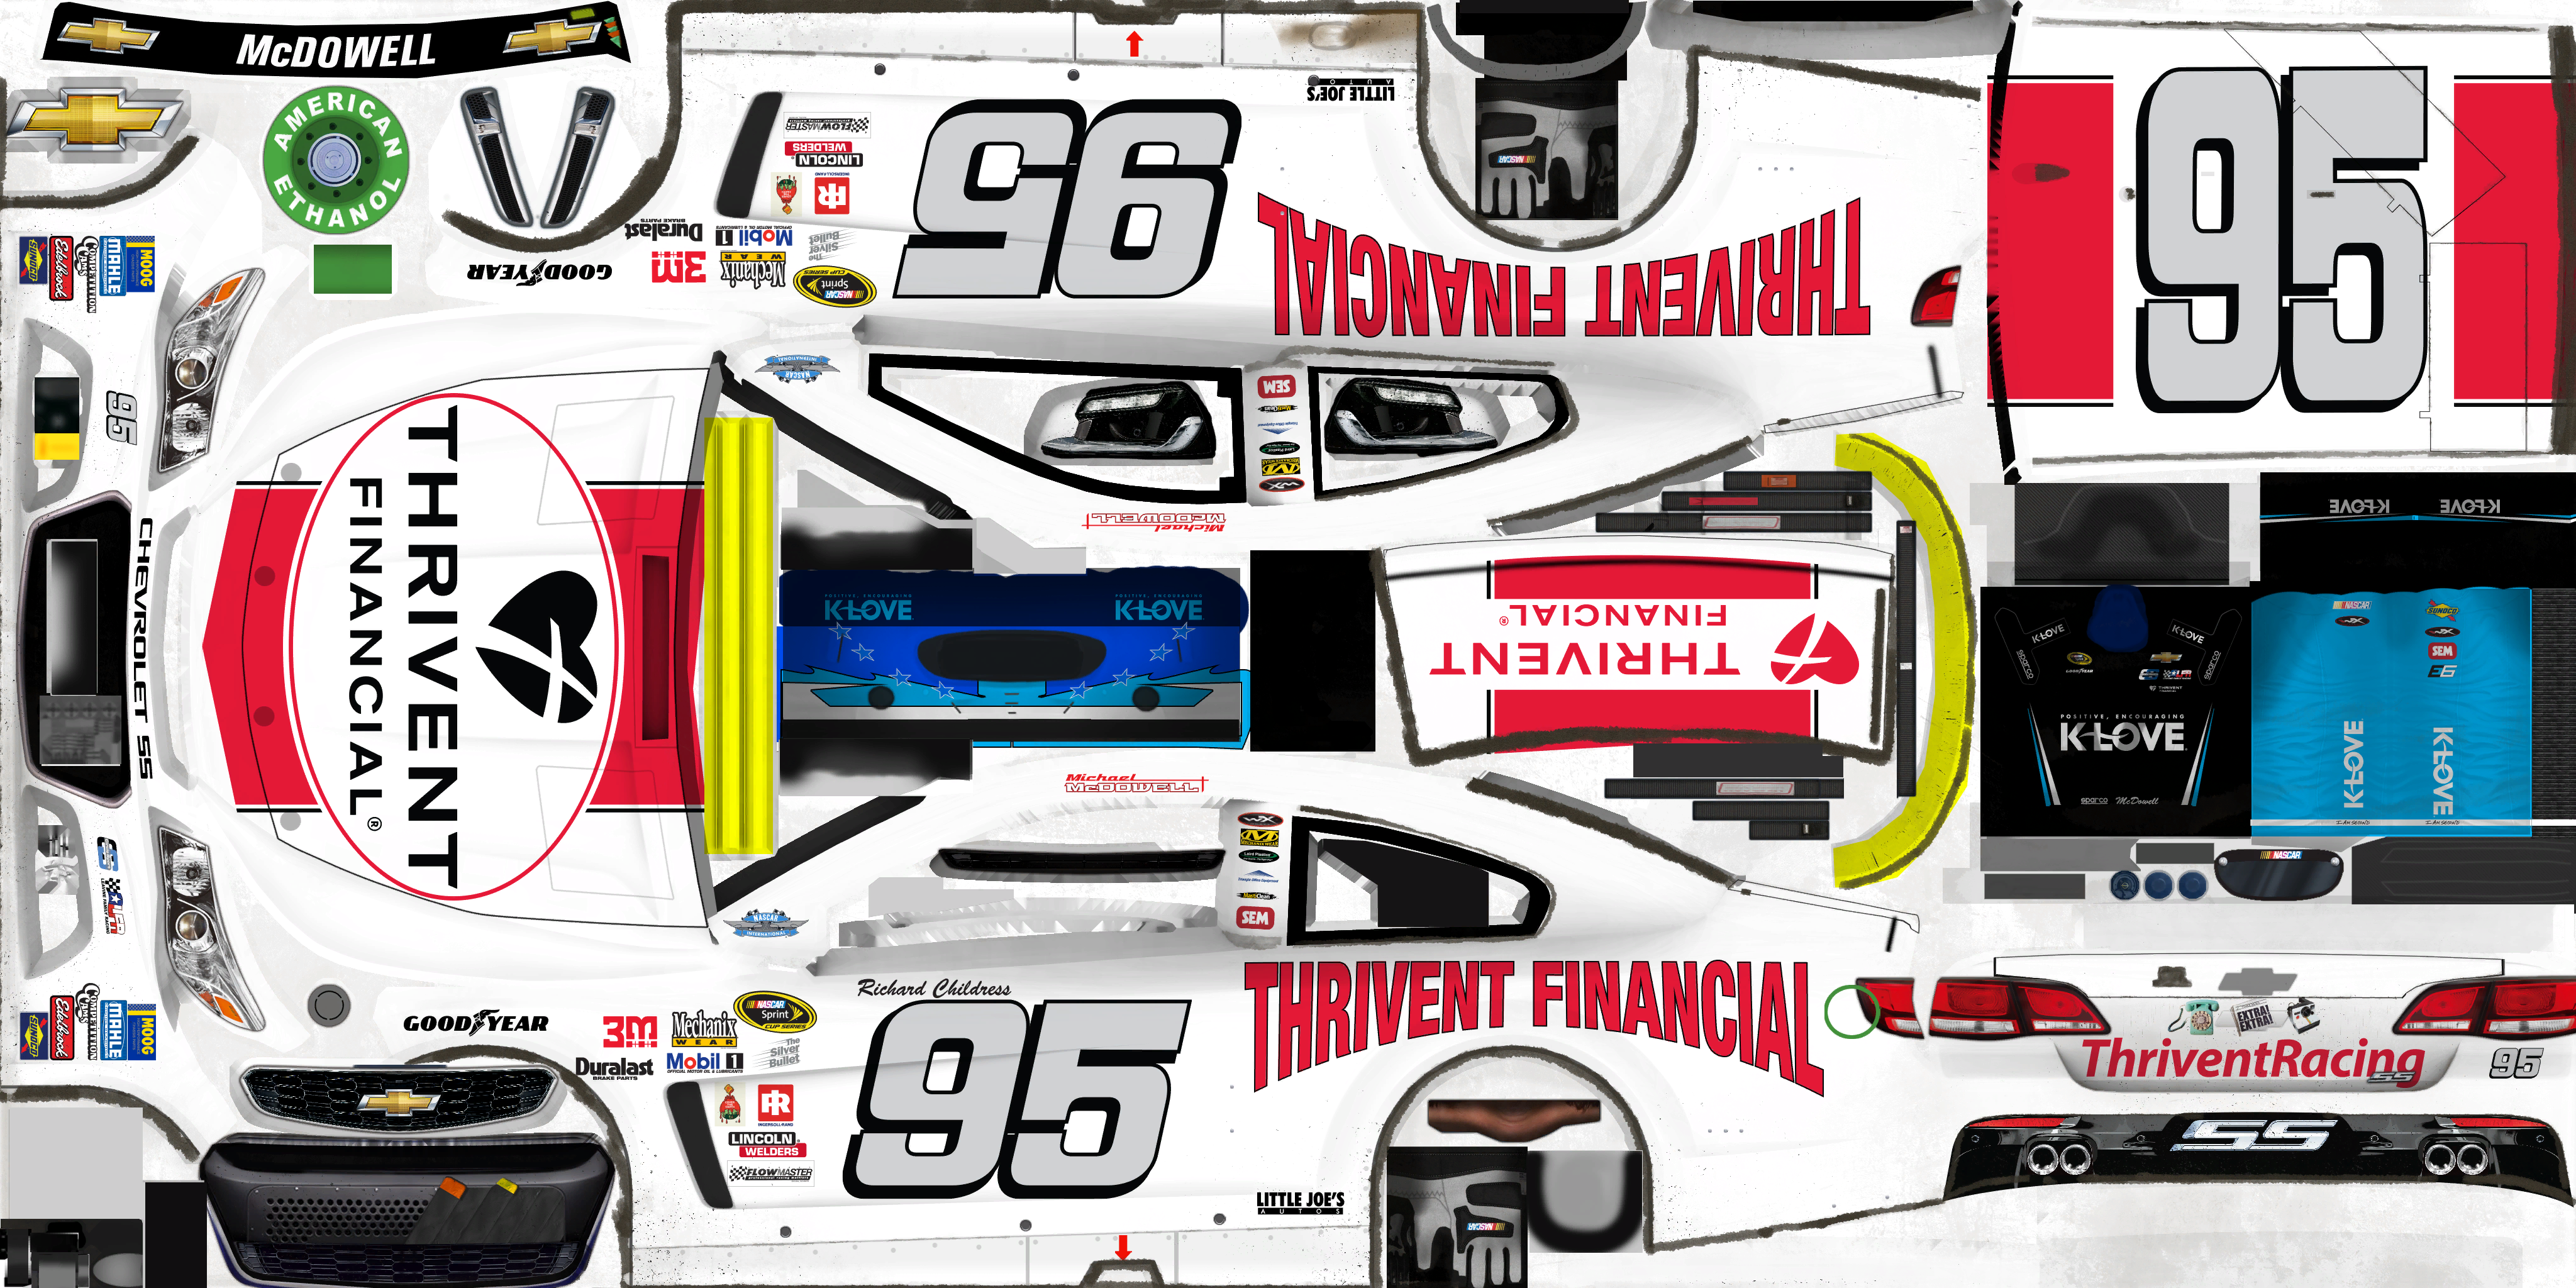 #95 Michael McDowell (Thrivent Financial Throwback)